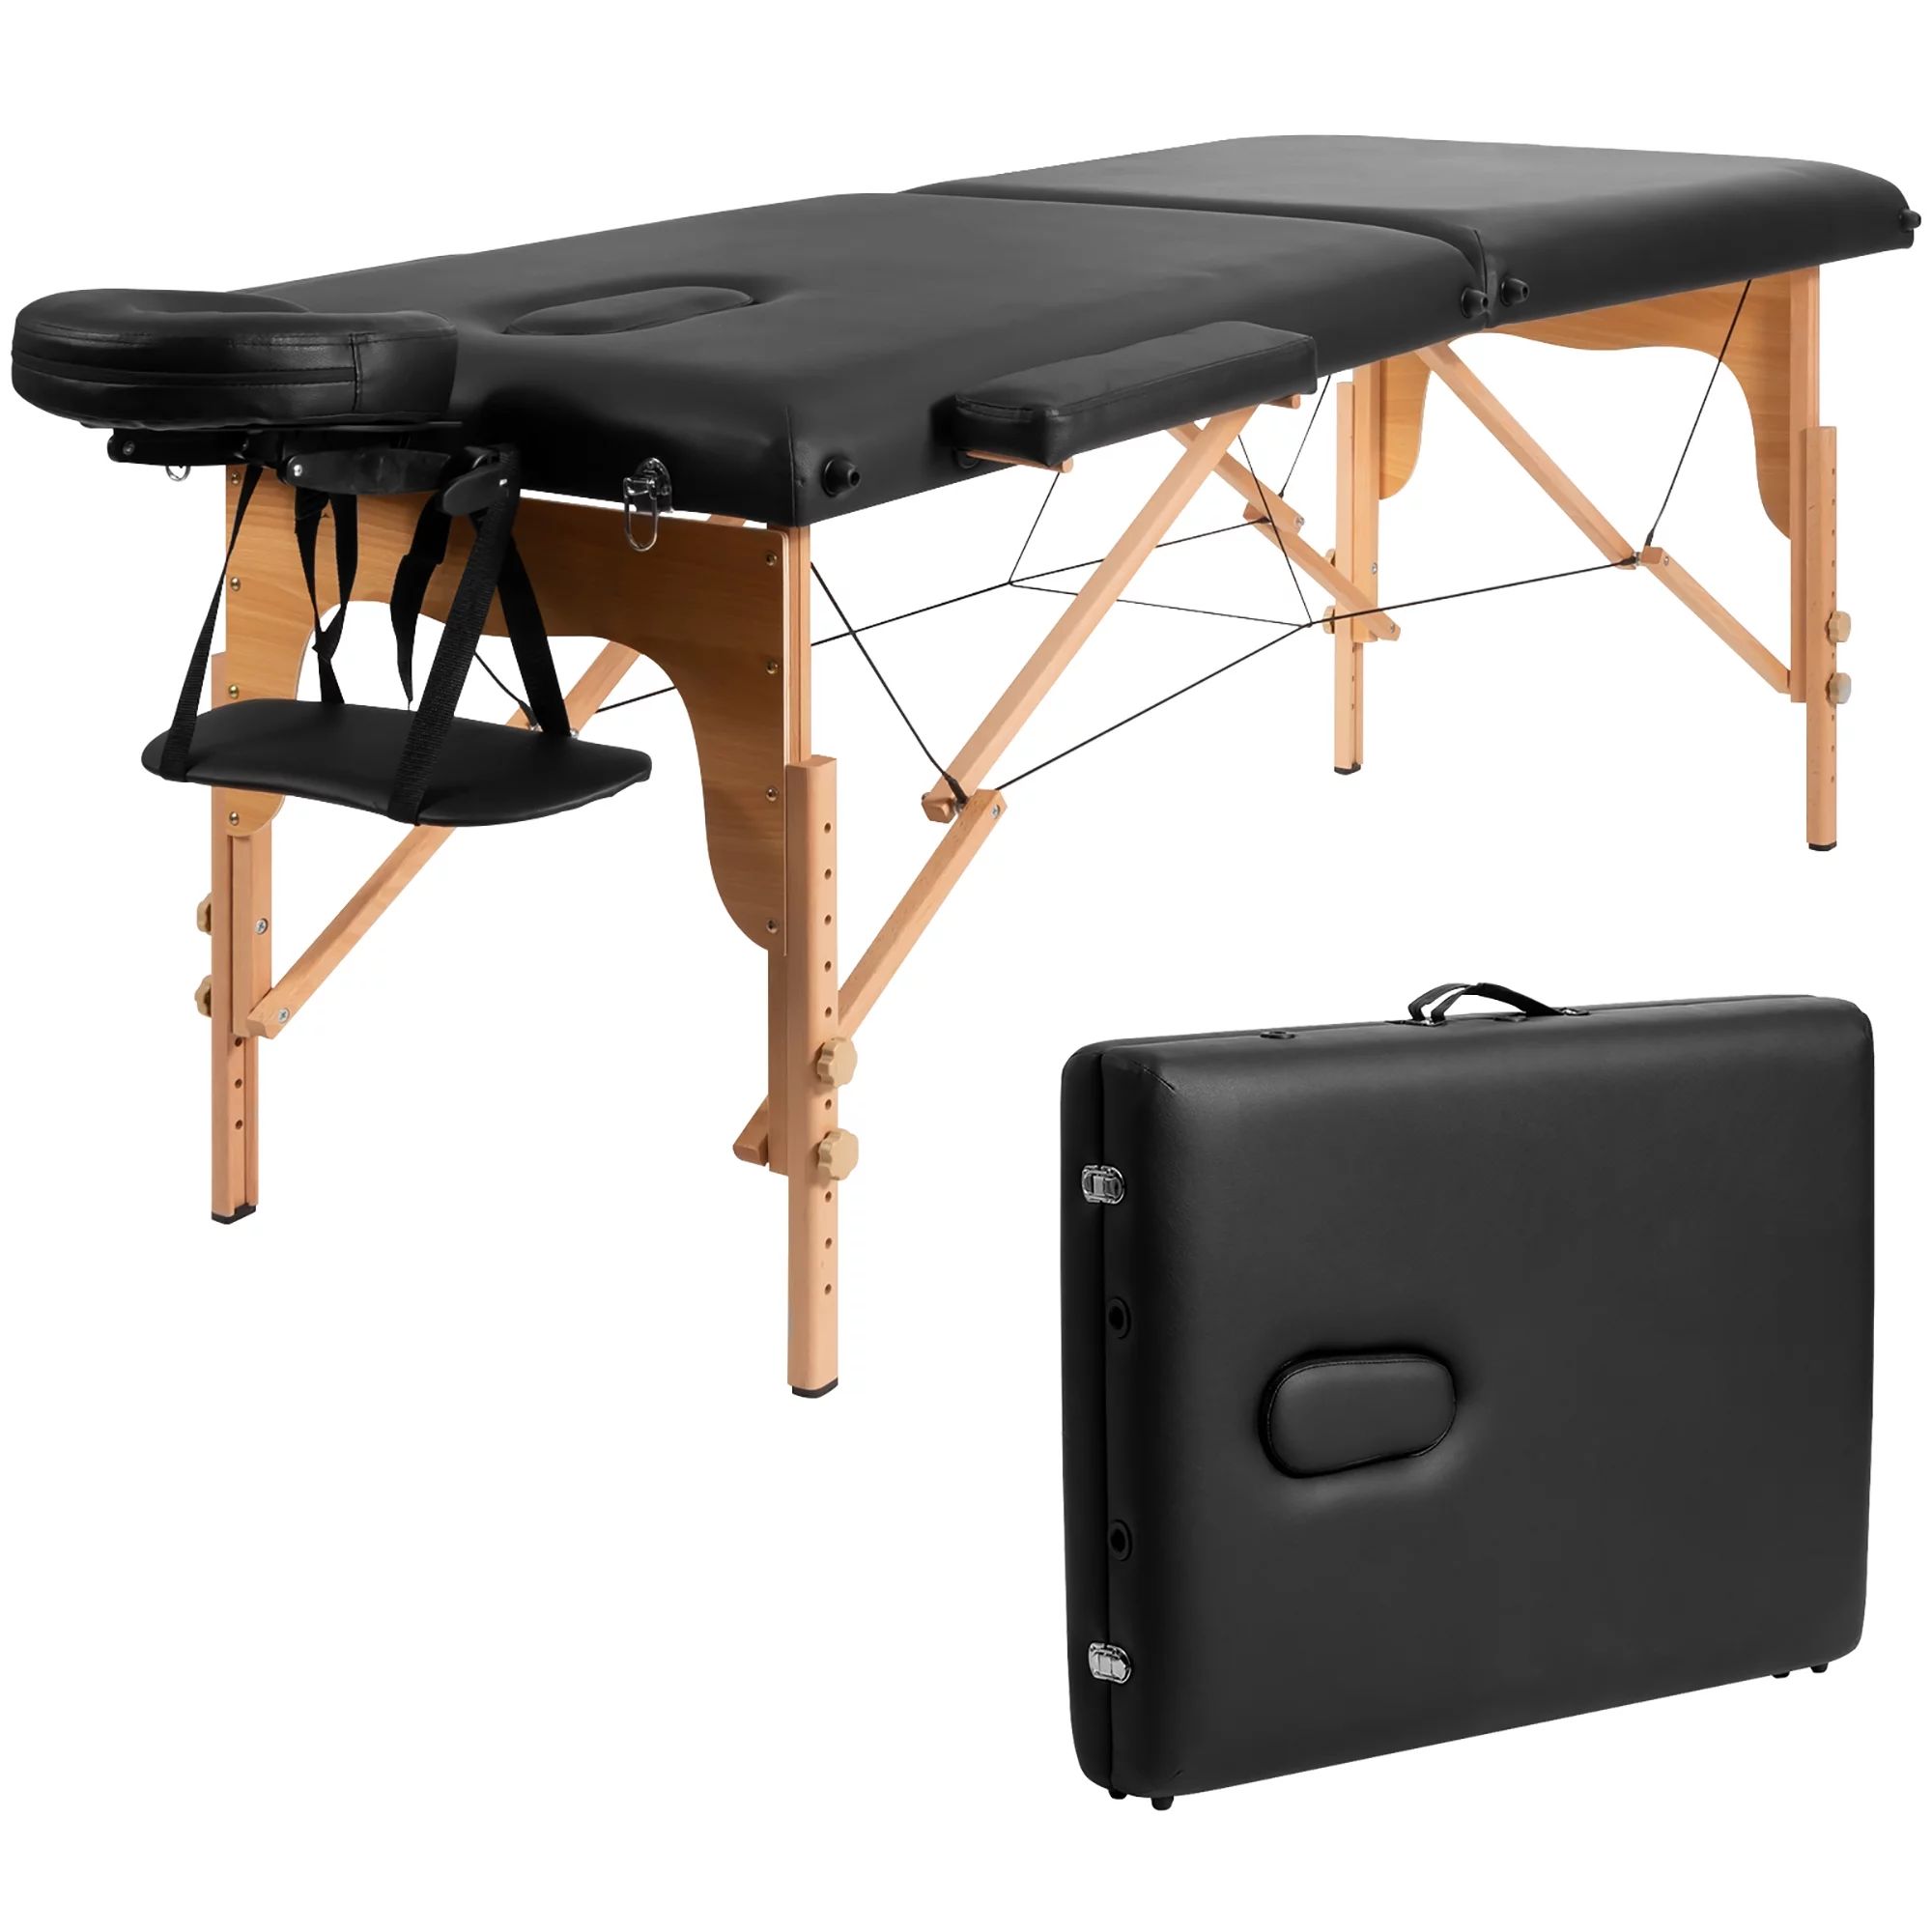 84''L Portable Massage Table Adjustable Facial Spa Bed Tattoo w/ Carry Case Black | Walmart (US)